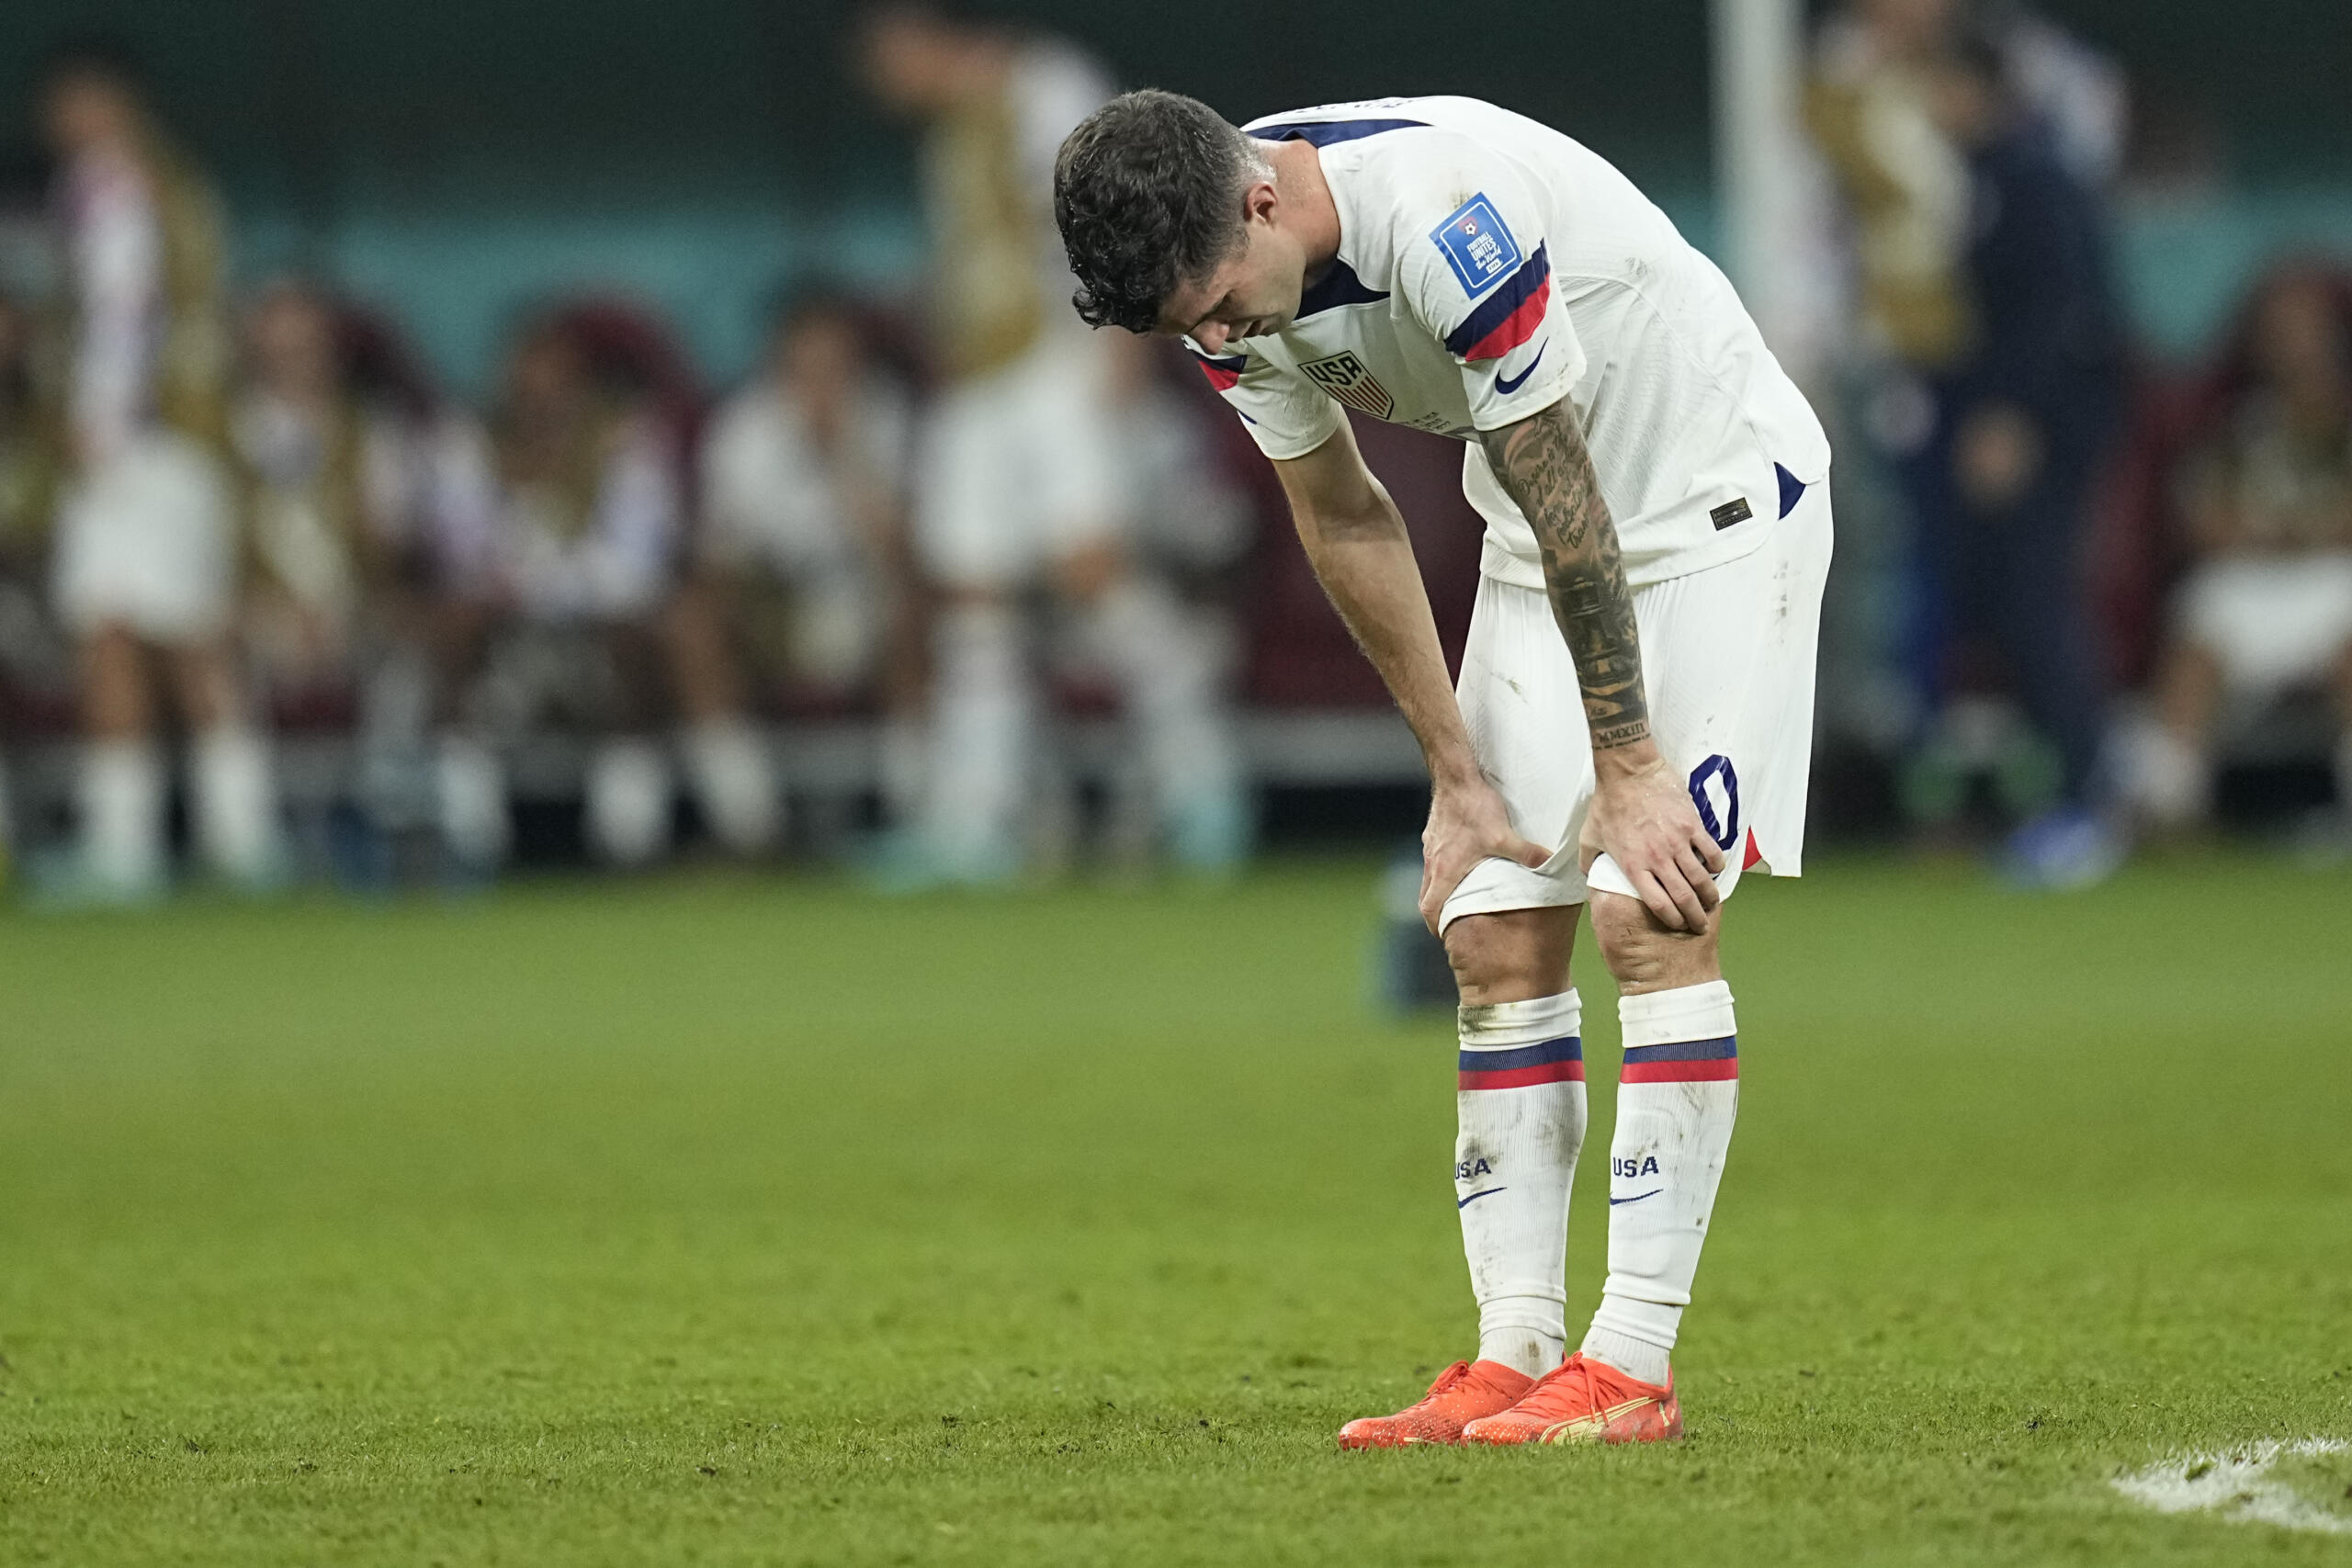 Christian Pulisic of the United States is dejected after the World Cup round of 16 soccer match between the Netherlands and the United States, at the Khalifa International Stadium in Doha, Qatar, Saturday, Dec. 3, 2022. Netherlands won 3-1.